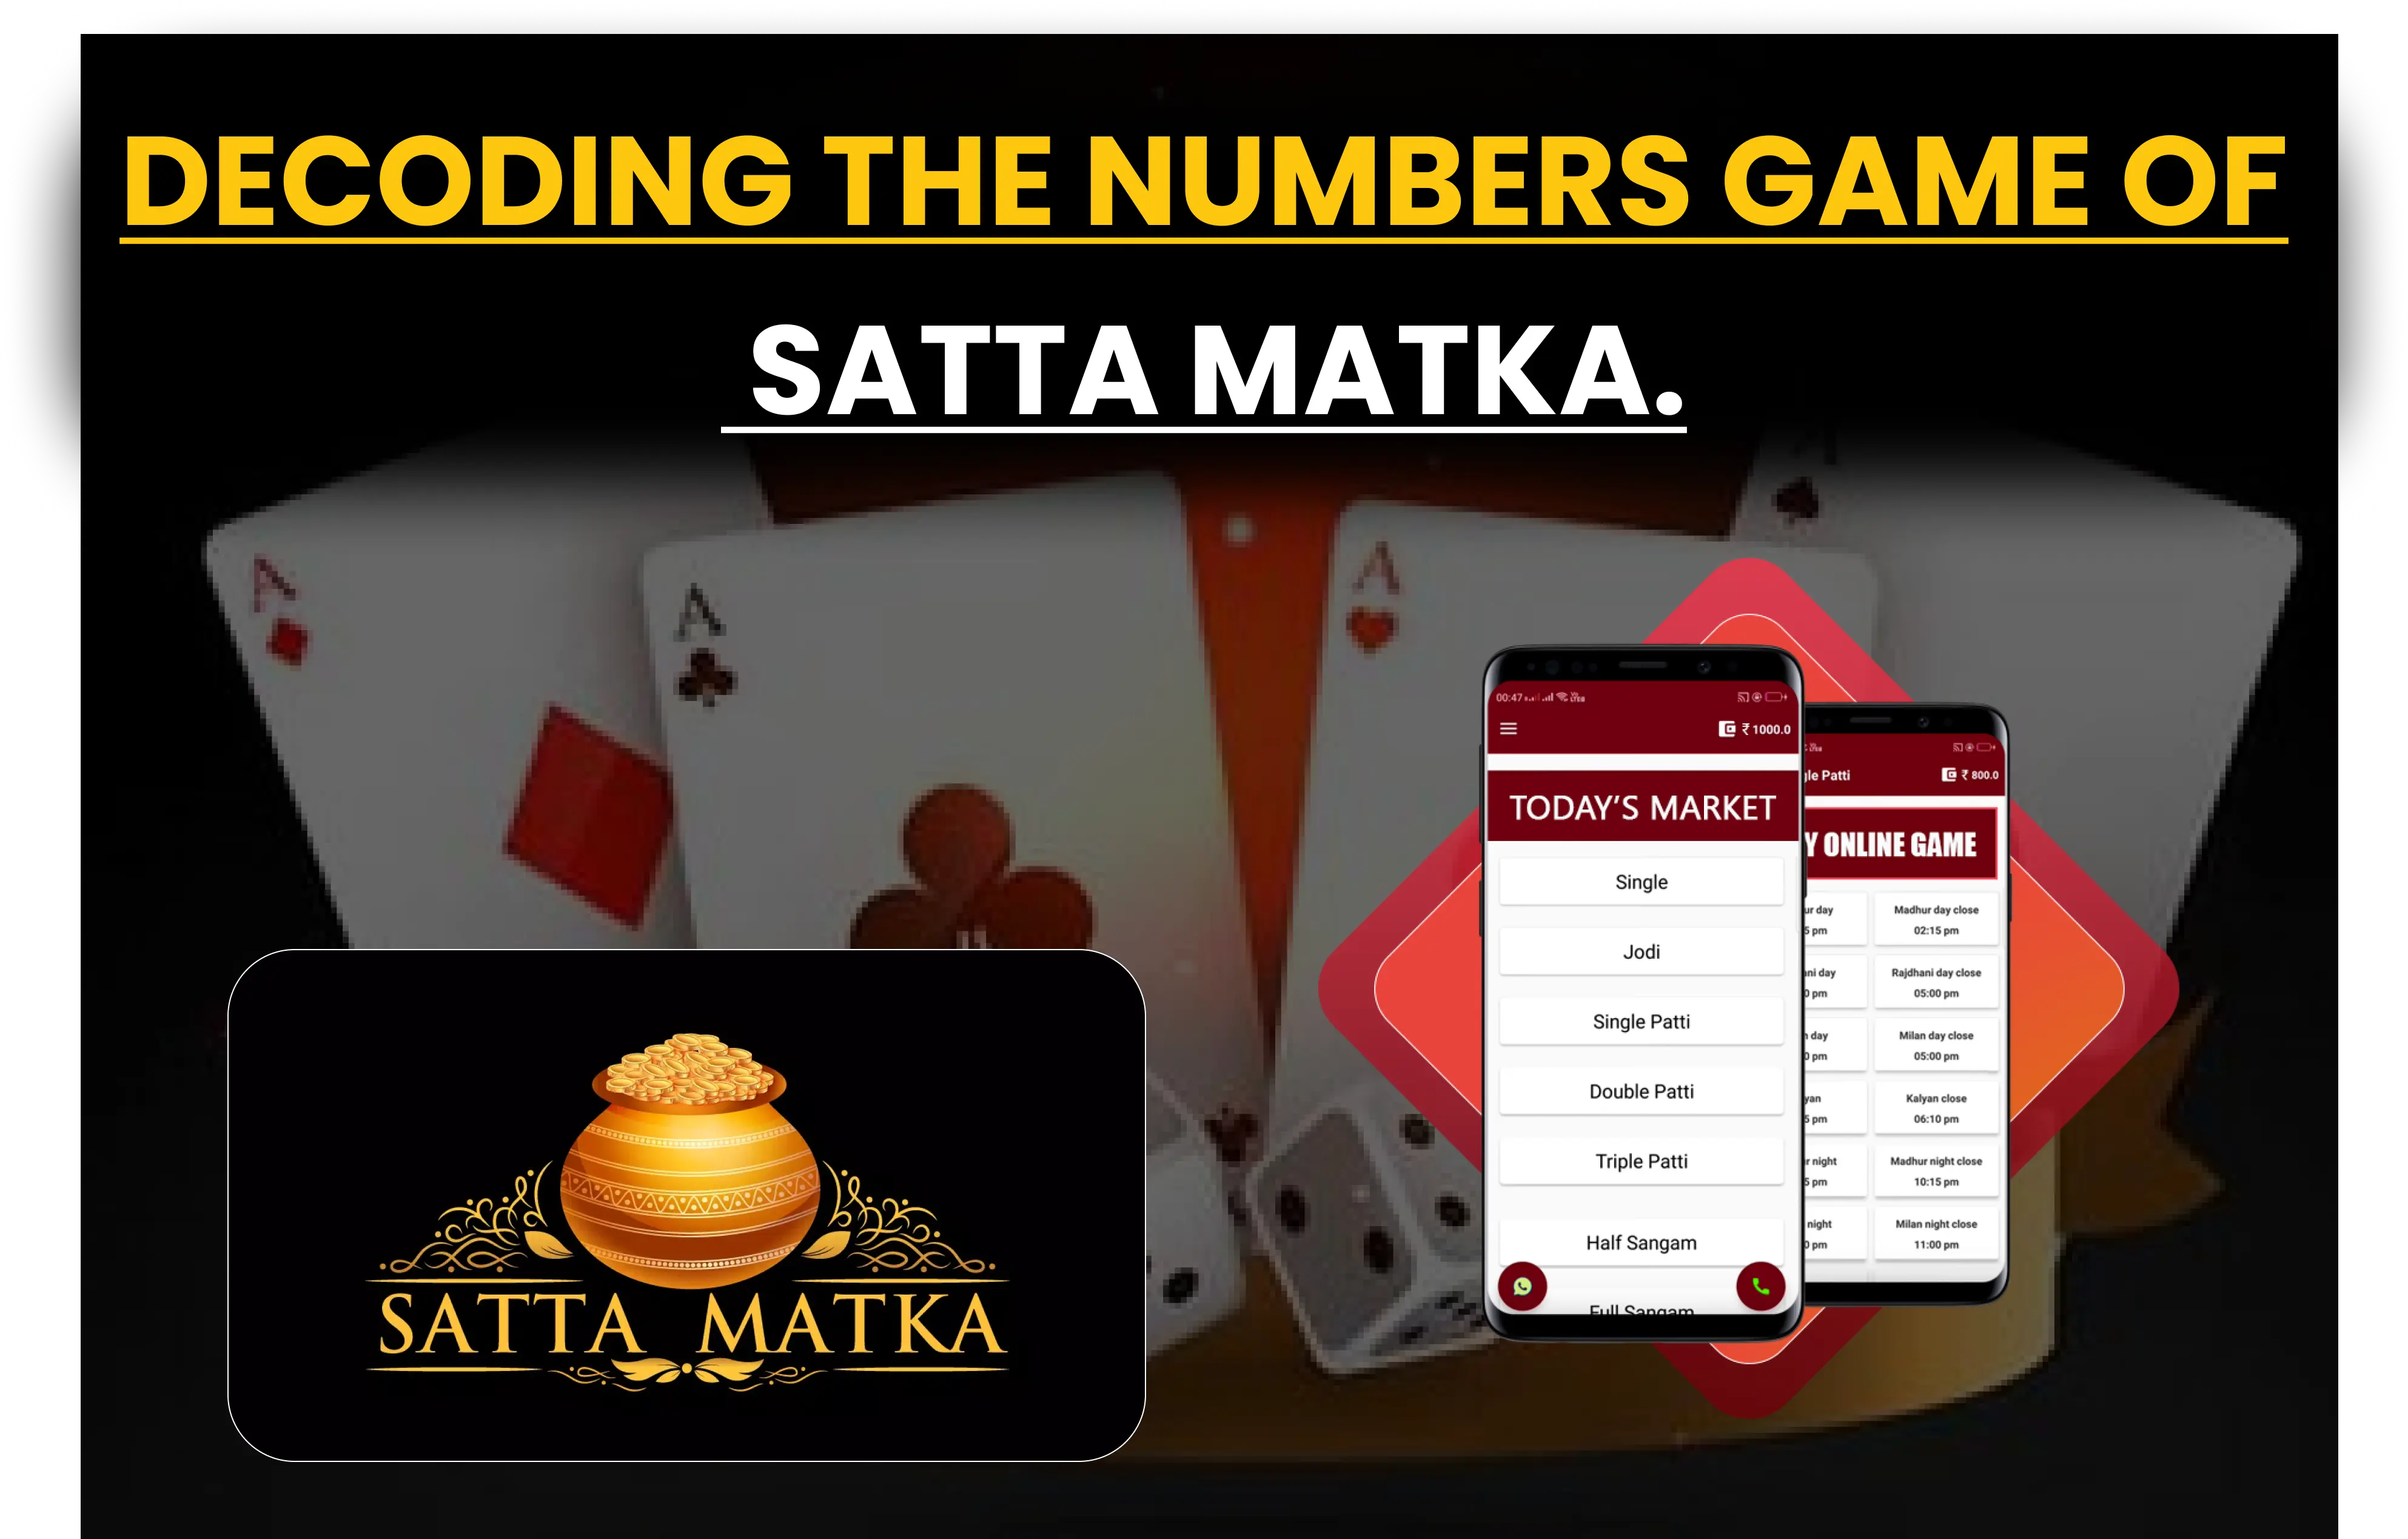 Decoding the Numbers Game of Satta Matka